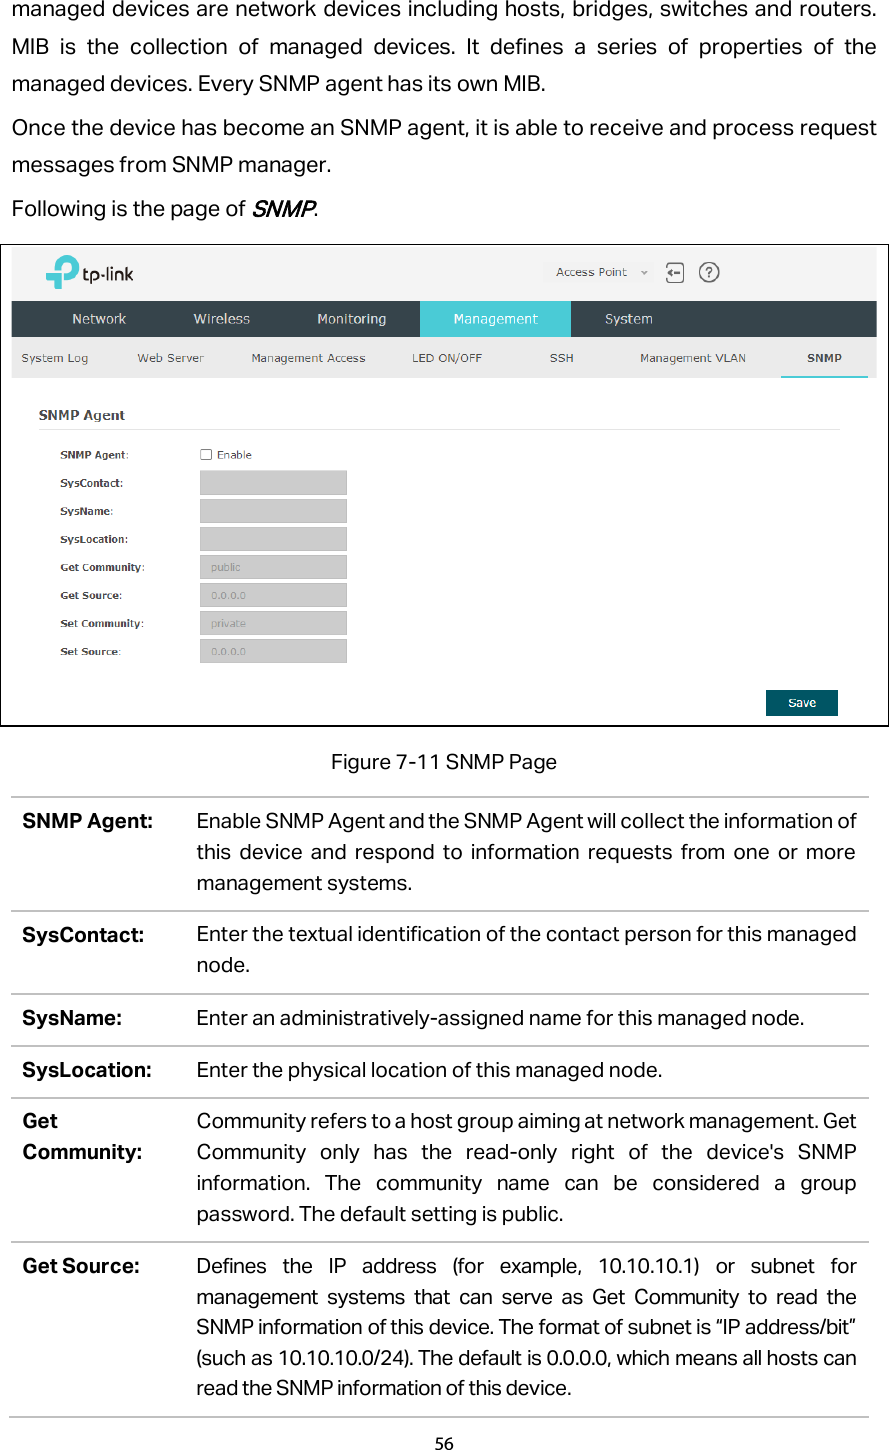 managed devices are network devices including hosts, bridges, switches and routers. MIB is the collection of managed devices. It defines a series of properties of the managed devices. Every SNMP agent has its own MIB. Once the device has become an SNMP agent, it is able to receive and process request messages from SNMP manager. Following is the page of SNMP.  Figure 7-11 SNMP Page SNMP Agent: Enable SNMP Agent and the SNMP Agent will collect the information of this device and respond to information requests from one or more management systems. SysContact: Enter the textual identification of the contact person for this managed node. SysName: Enter an administratively-assigned name for this managed node. SysLocation: Enter the physical location of this managed node. Get Community: Community refers to a host group aiming at network management. Get Community only has the read-only right of the device&apos;s SNMP information. The community name can be considered a group password. The default setting is public. Get Source: Defines the IP address (for example, 10.10.10.1) or subnet for management systems that can serve as Get Community to read the SNMP information of this device. The format of subnet is “IP address/bit” (such as 10.10.10.0/24). The default is 0.0.0.0, which means all hosts can read the SNMP information of this device. 56  